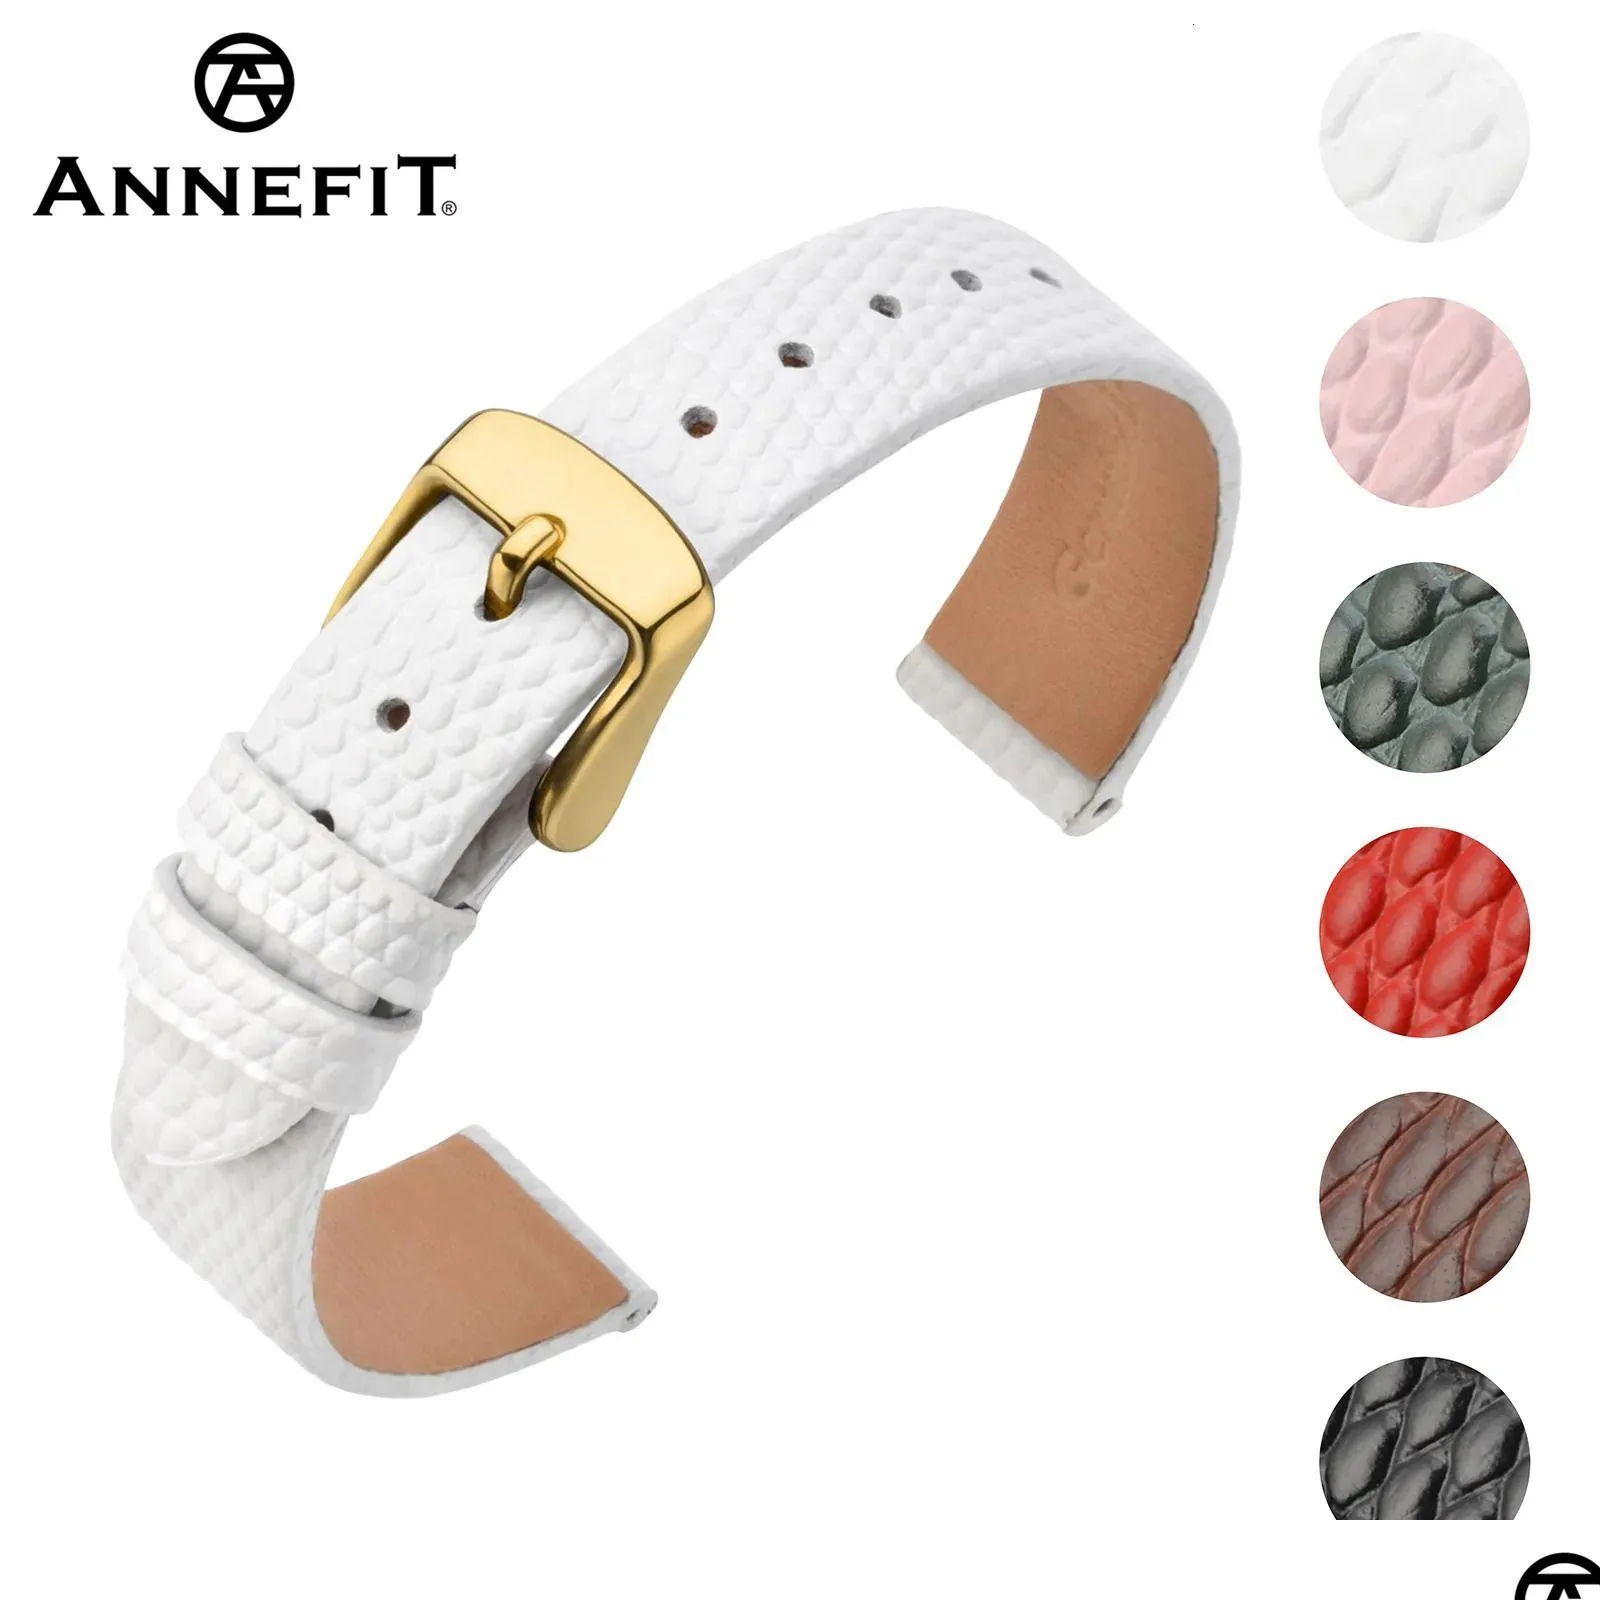 Watch Bands Annefit Leather Band For Women 12Mm 14Mm 16Mm 18Mm 20Mm Lizard Grain Slim Thin Replacement Strap Stainless Steel Buckle Dr Dhjtv